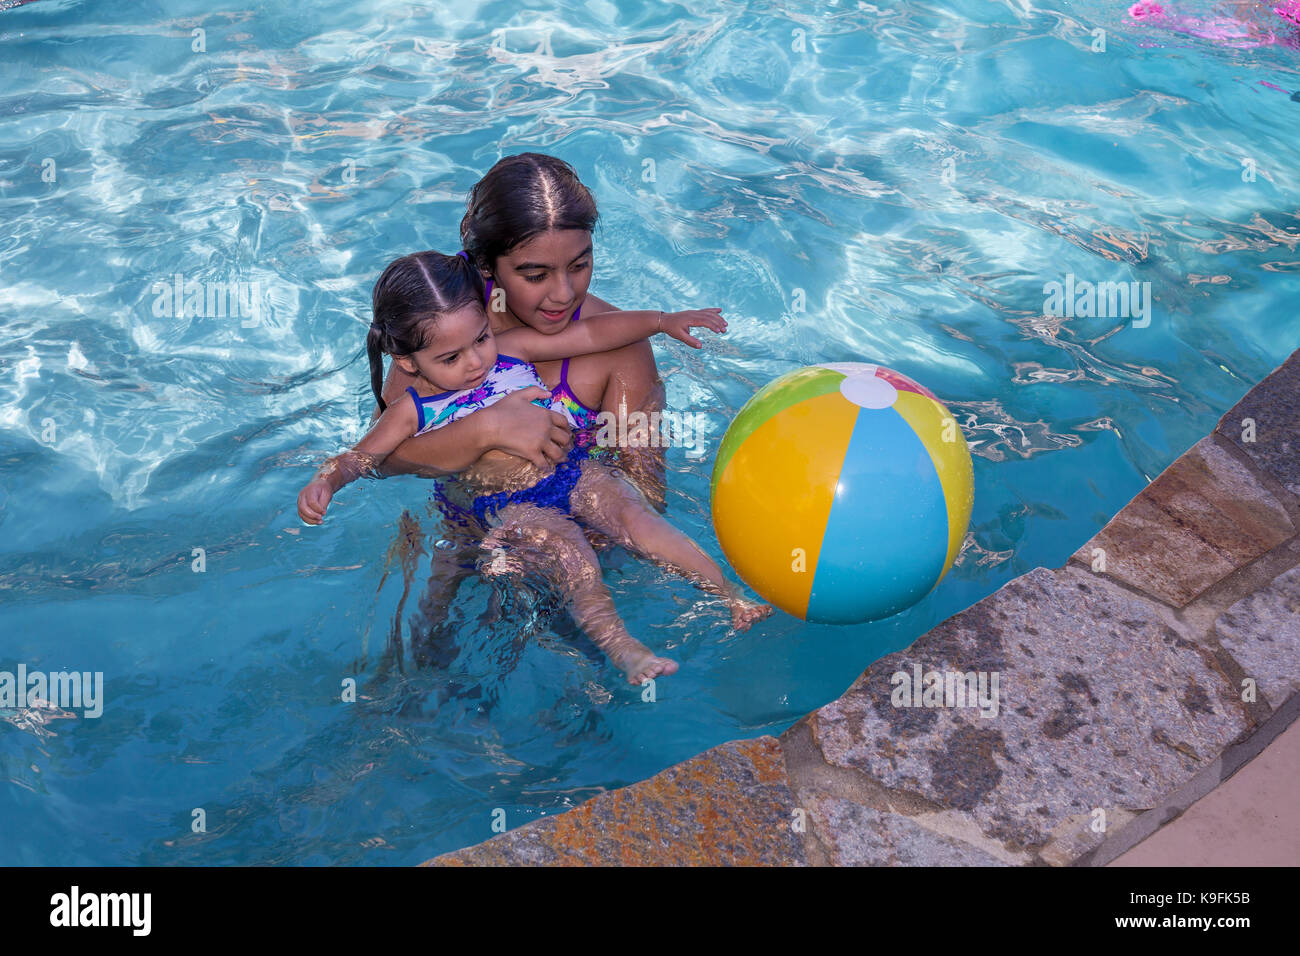 2, two, Hispanic girls, sisters, playing in swimming pool, swimming pool, fresh water swimming pool, Castro Valley, Alameda County, California Stock Photo